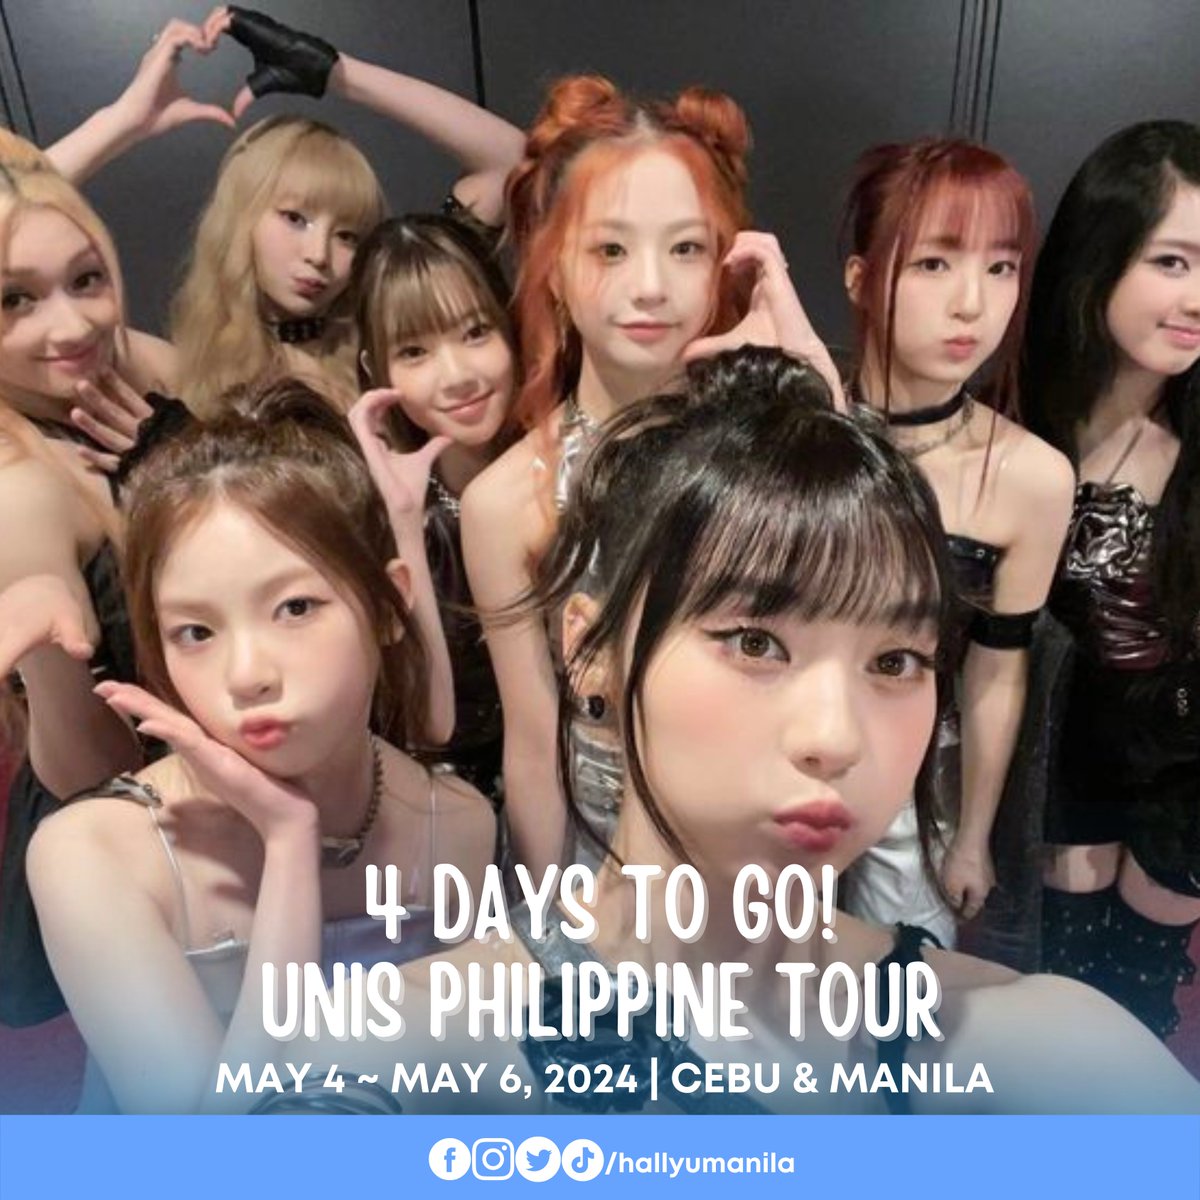 4 days to go, UNIS fans! 🔔

If you haven't already, get your WE UNIS albums via cdmentertainment.ph to join UNIS' fansign events on May 4, 5, and 6!

Presented by @cdmentph and @rafaella_films
#UNIS_Philippine_Tour
#UNISinCEBU
#UNISinMANILA
#UNISinMANILA_Day2